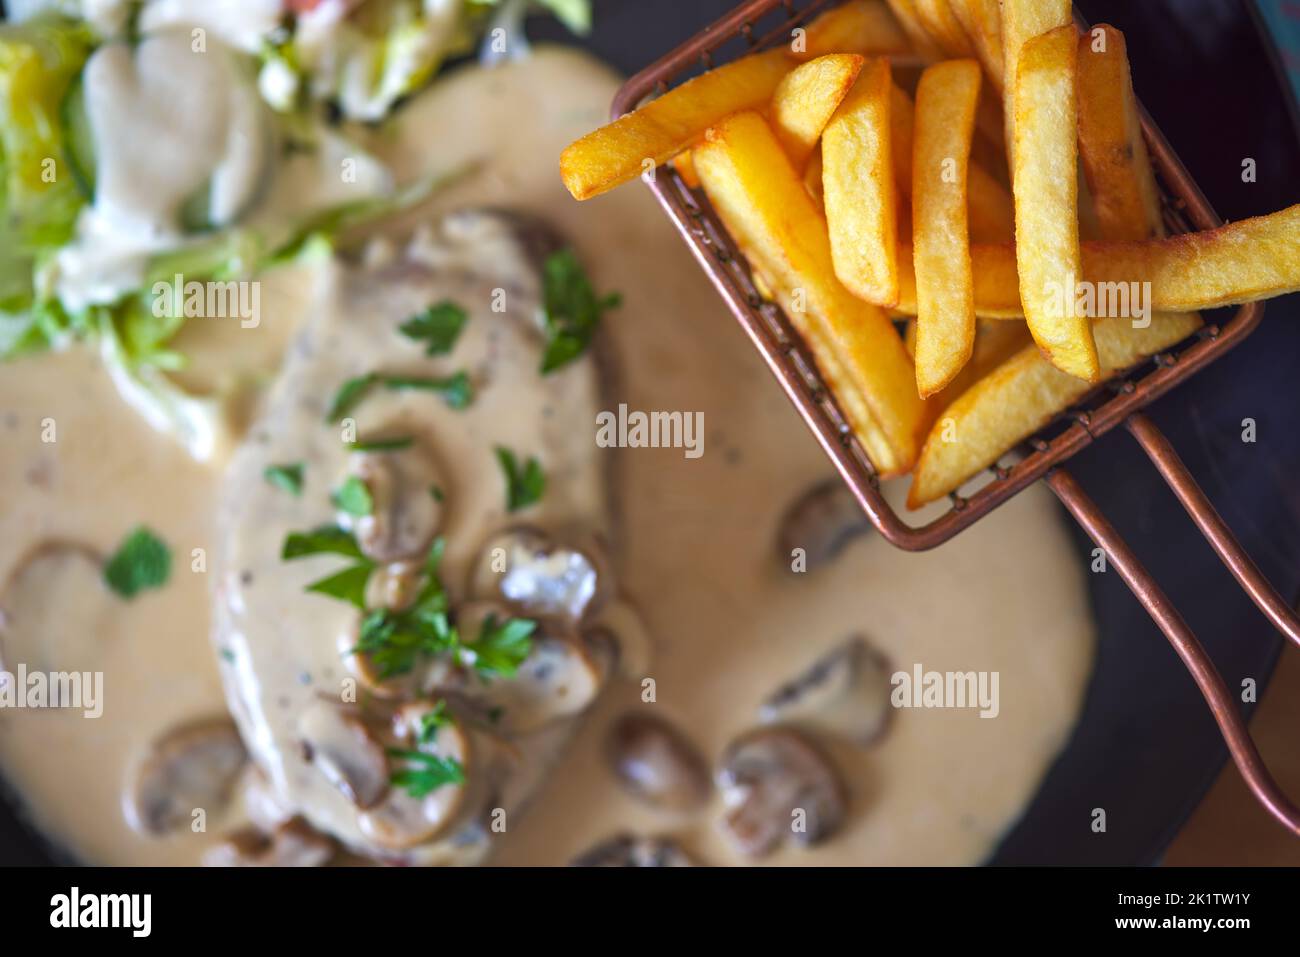 Fries and fillet of beef with mushroom sauce in background - close up view Stock Photo